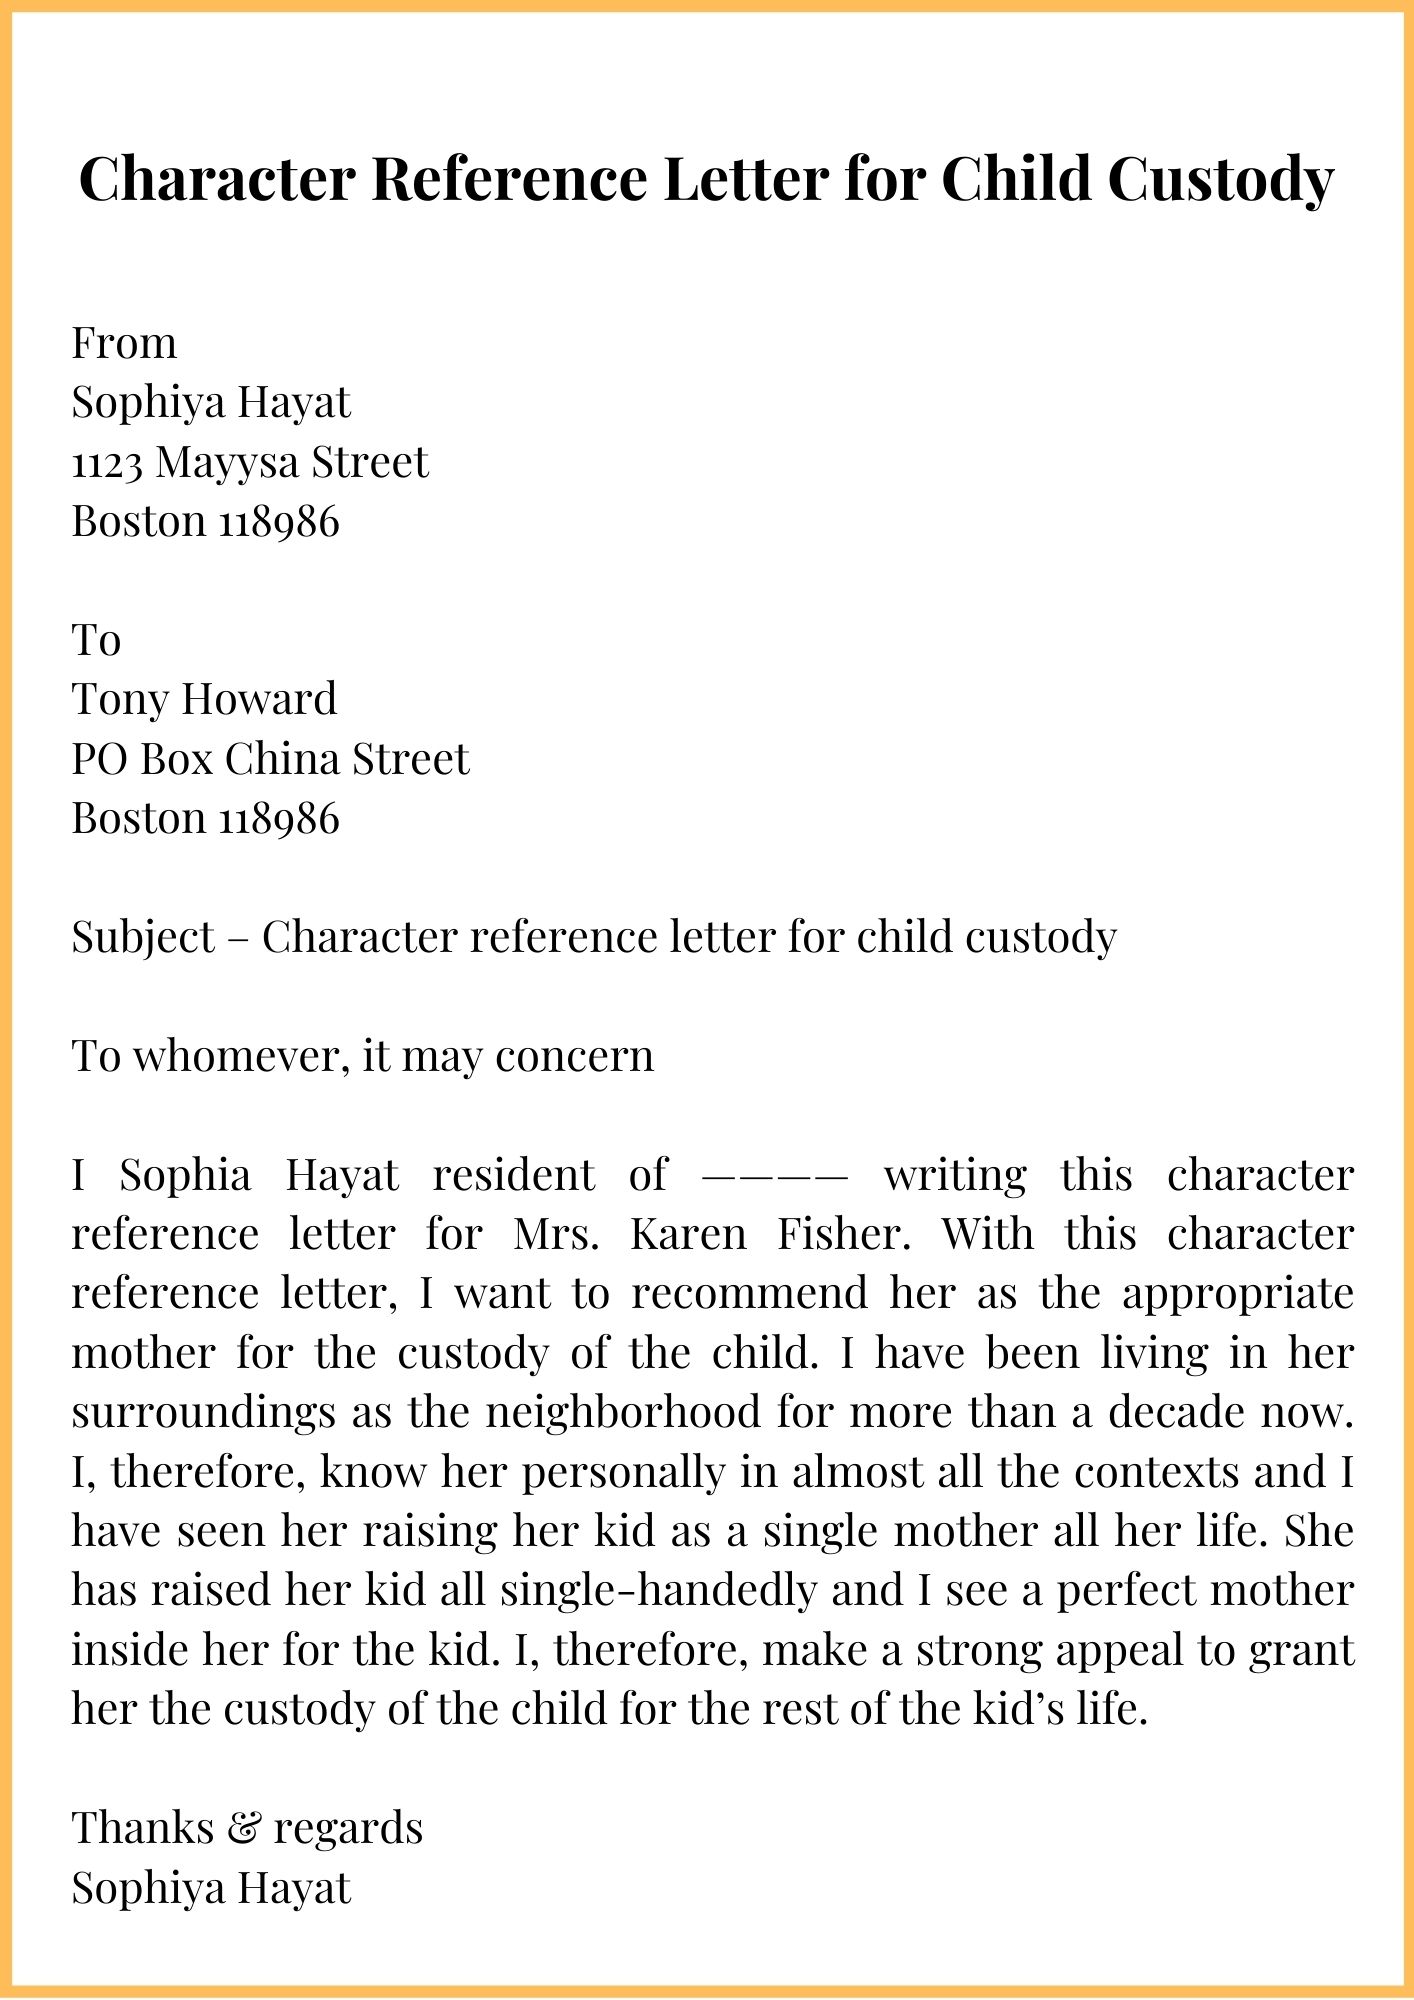 Sample Character Reference Letter For Child Custody